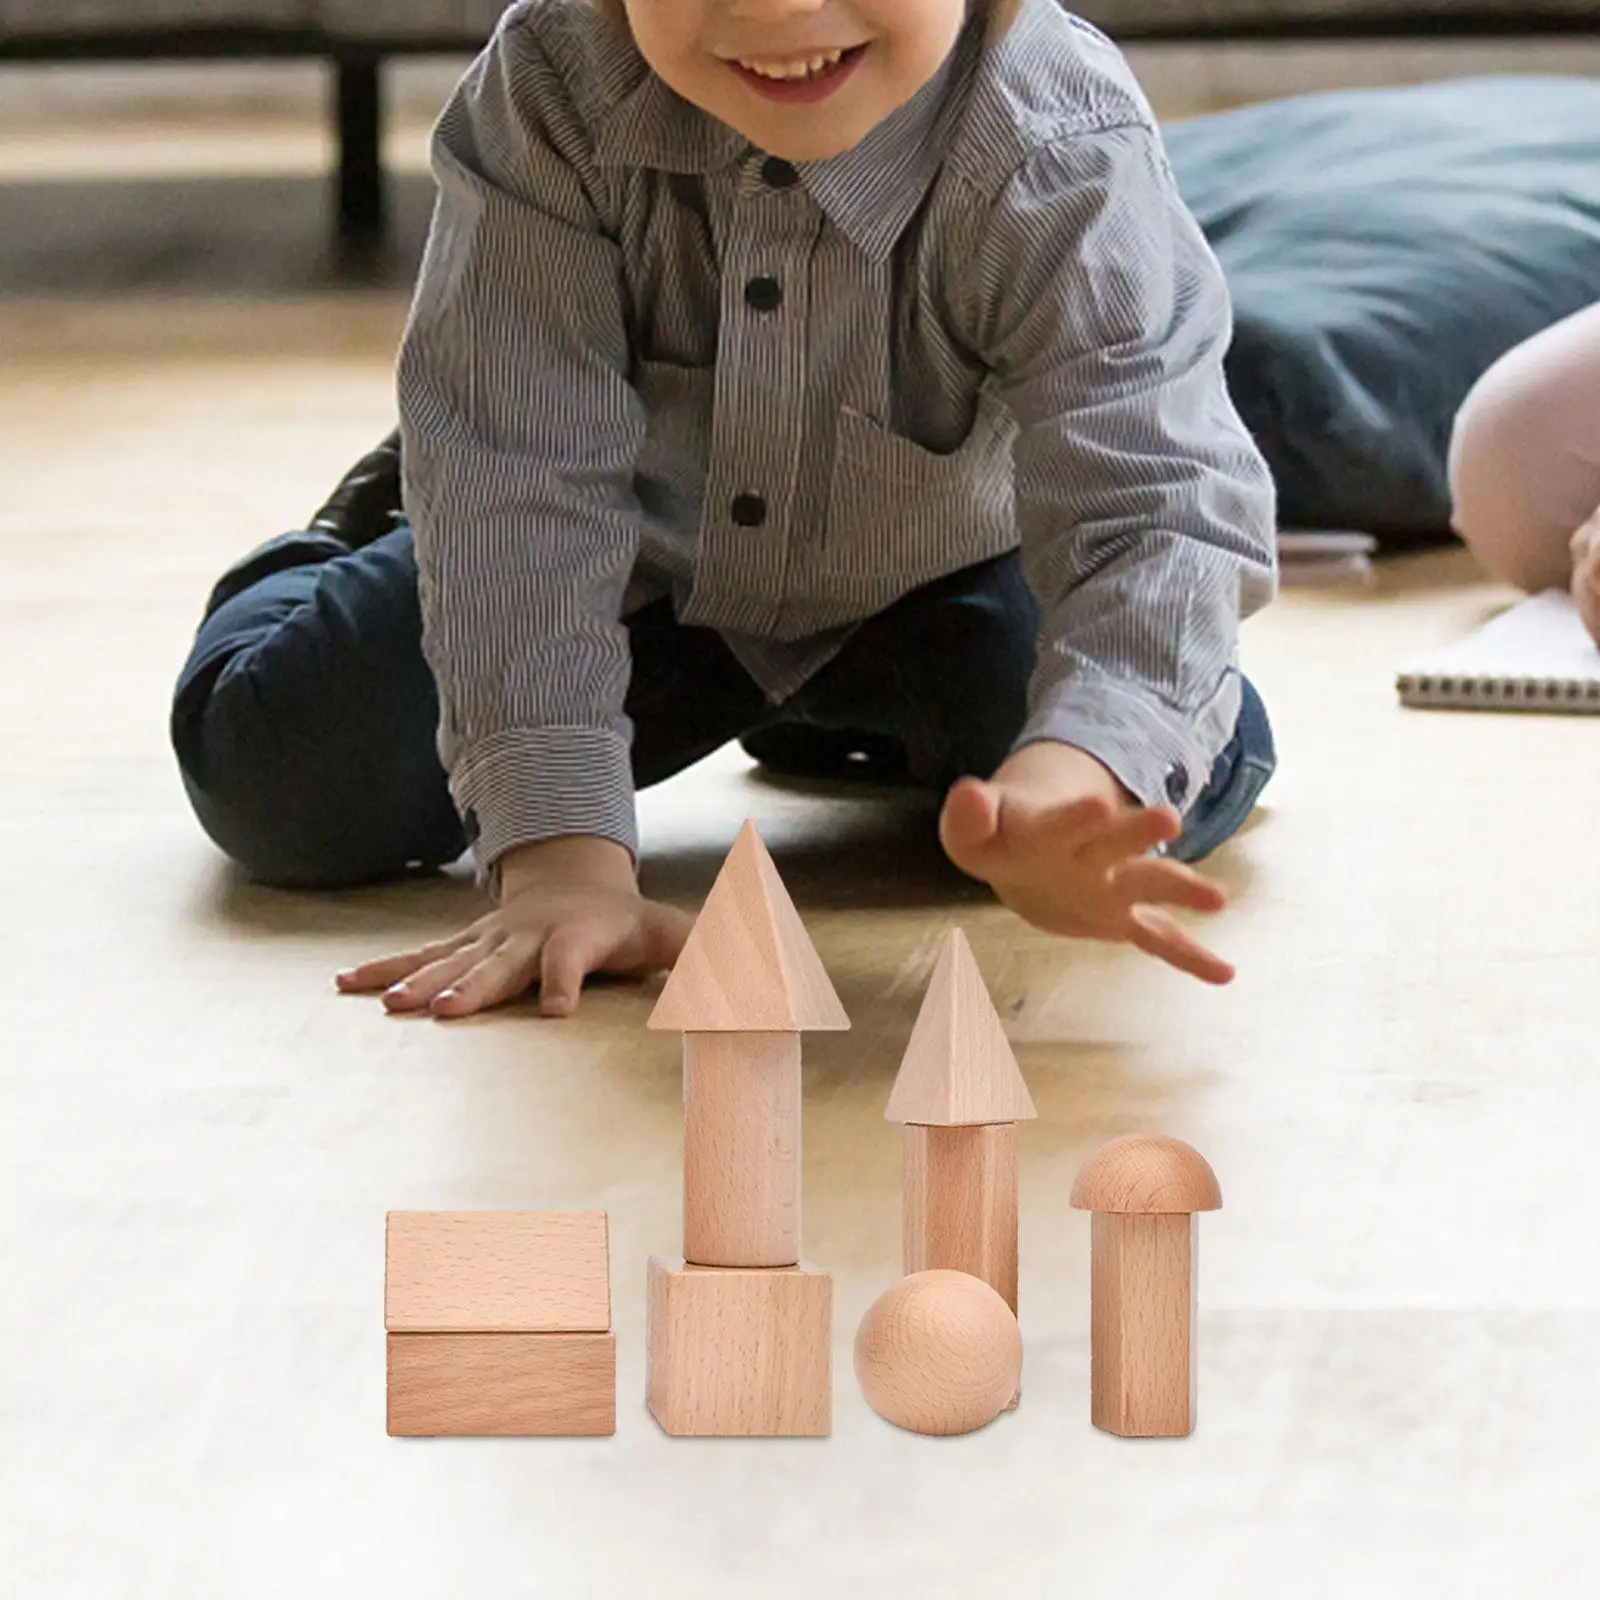 Wood Geometric Solid Blocks Smooth Puzzle Toy 3D Shapes Multifunction Sturdy Educational Toys for Home Preschool Classroom Baby